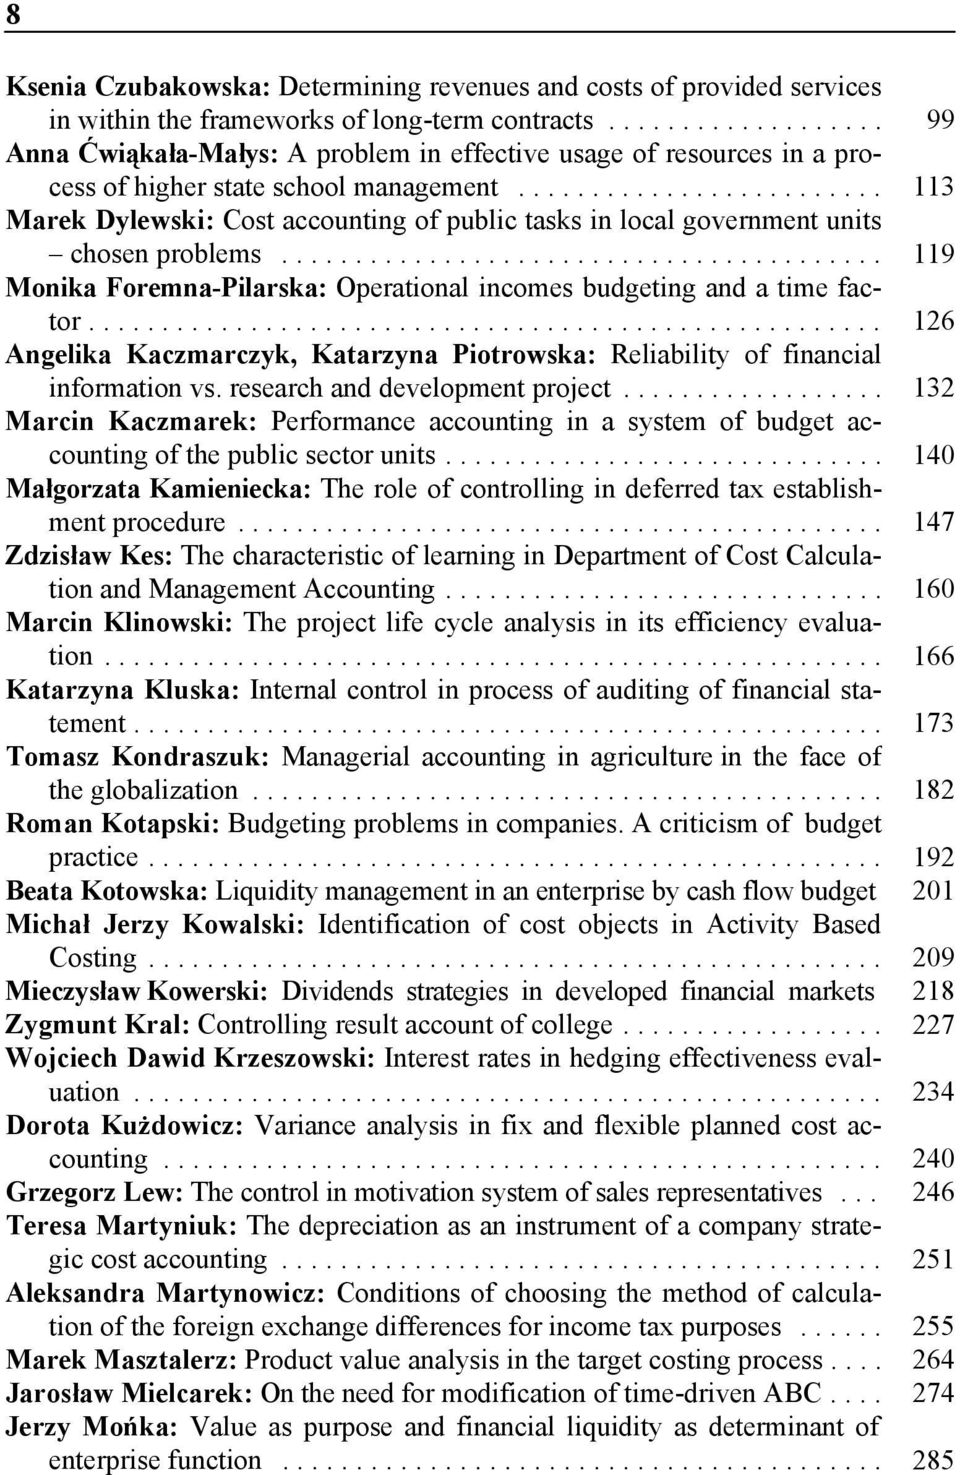 .. 113 Marek Dylewski: Cost accounting of public tasks in local government units chosen problems... 119 Monika Foremna-Pilarska: Operational incomes budgeting and a time factor.